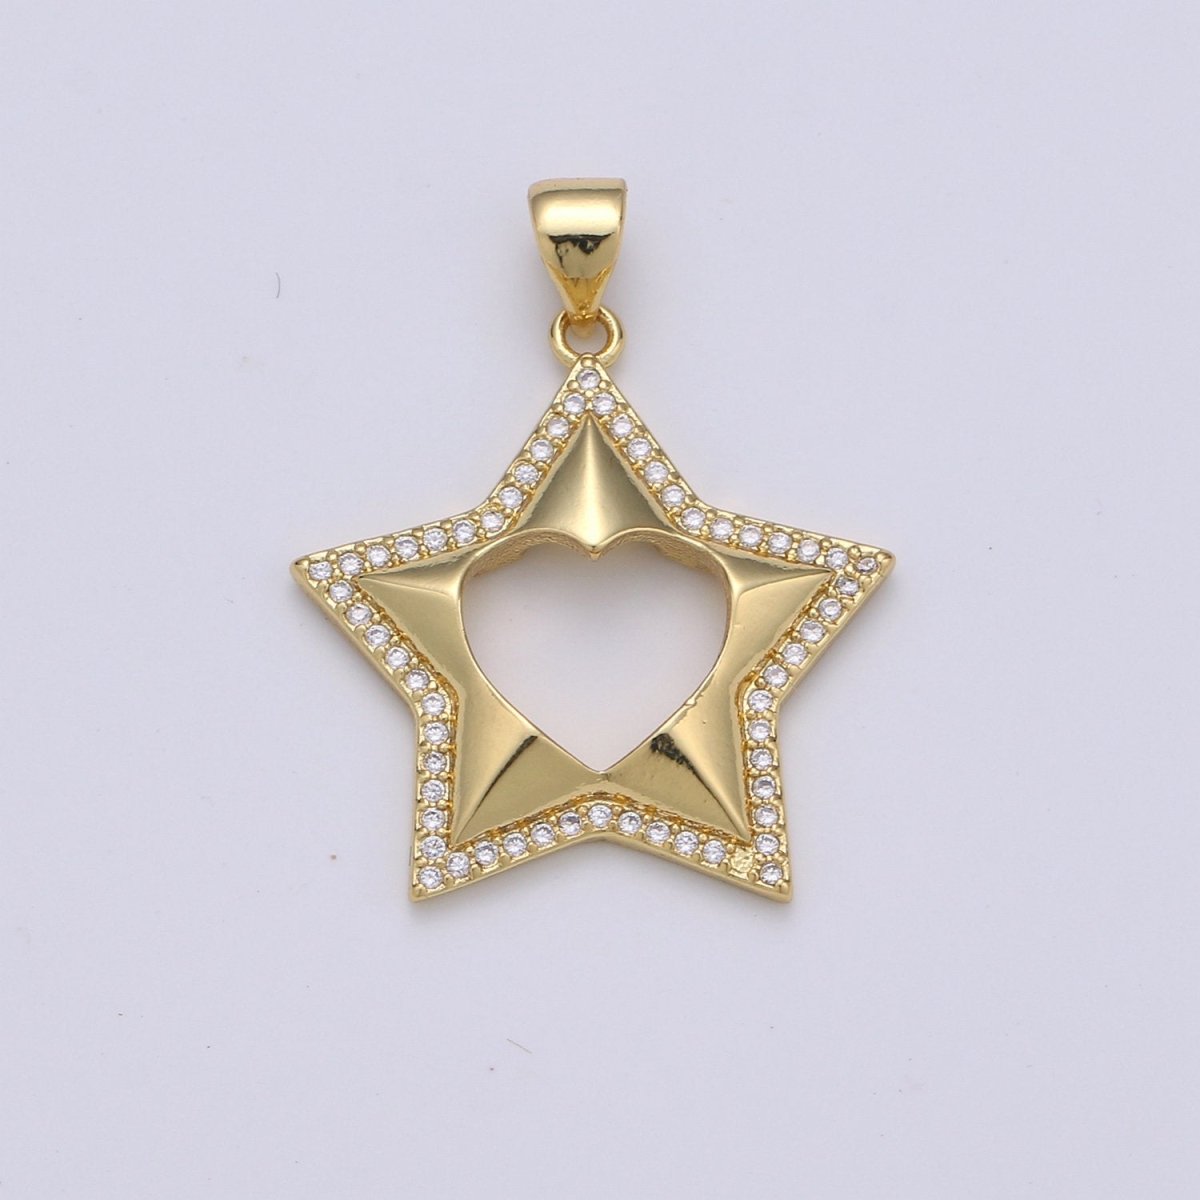 24k Gold Filled Micro Pave CZ Star Pendant Charm, Five Star Pendant Charm, Gold Filled Celestial Pendant, For DIY Jewelry Making I-727 - DLUXCA